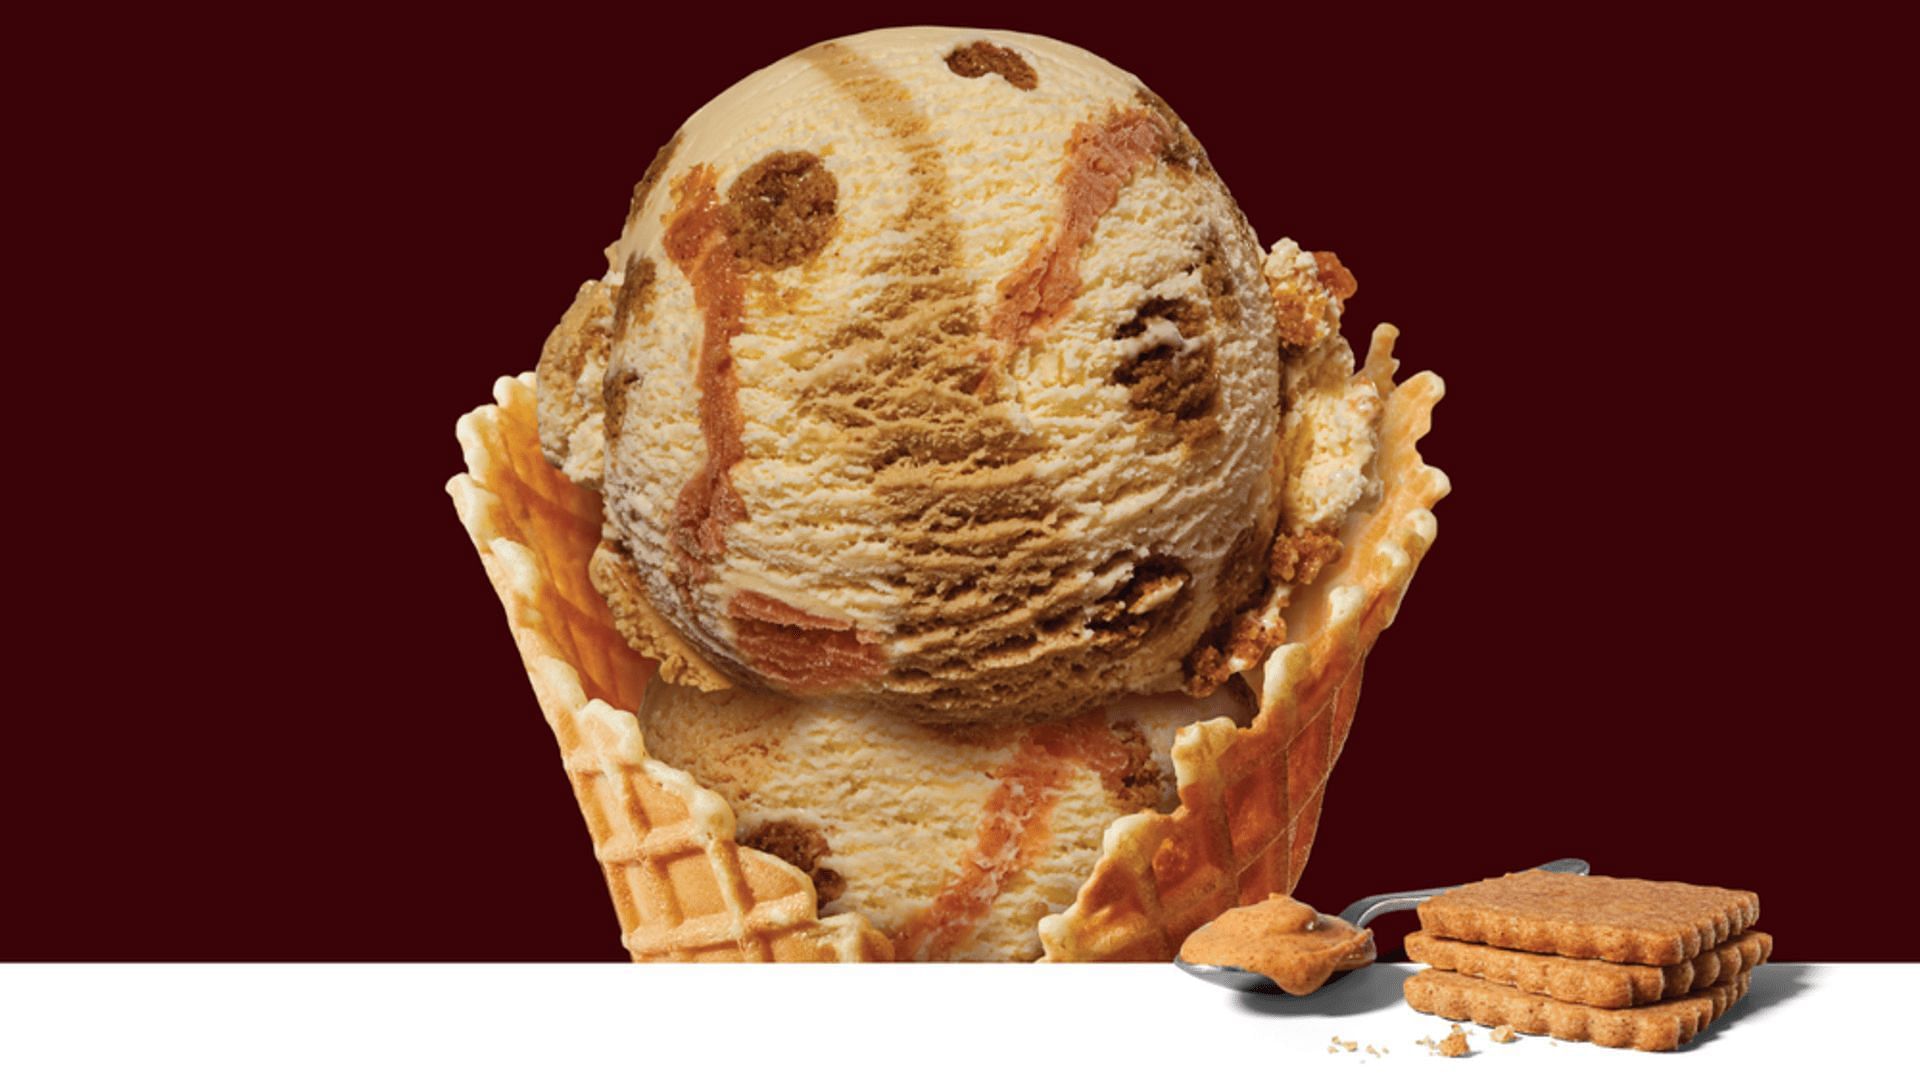 Promotional material for Cookie Butter Ice Cream (Image via Baskin Robbins)